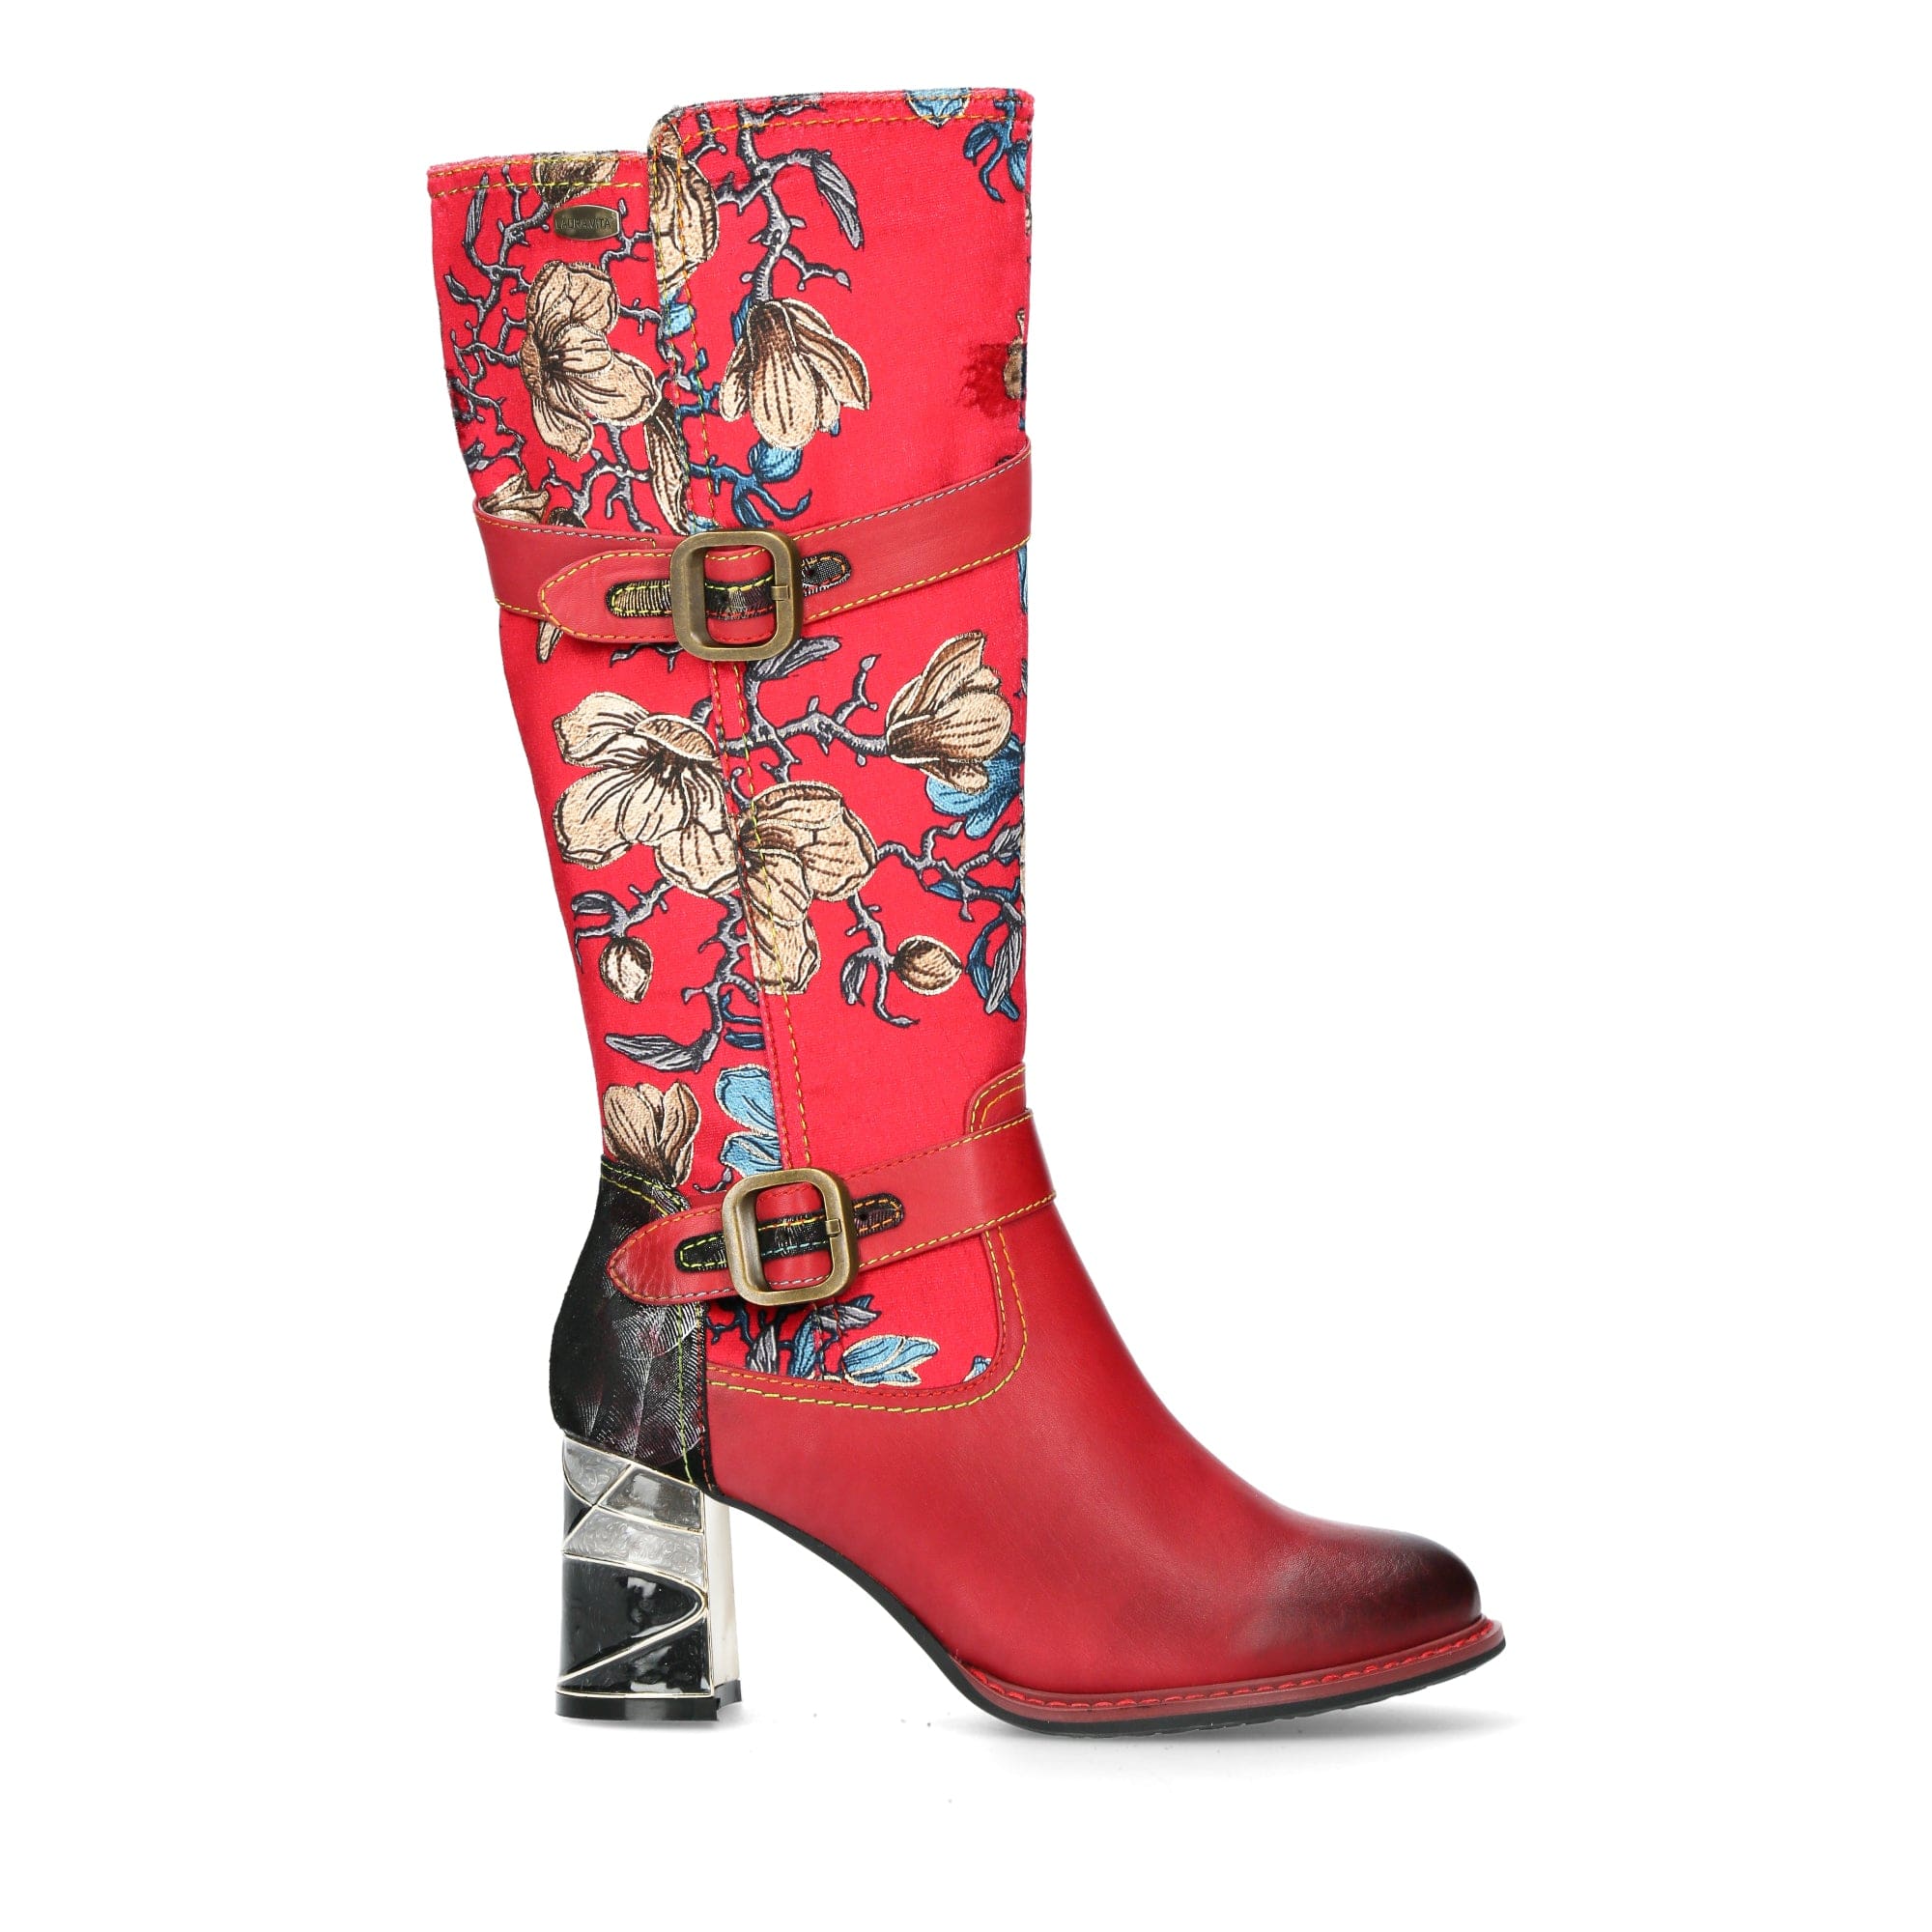 Schuh MARBREO 01 - 35 / Rot - Stiefel